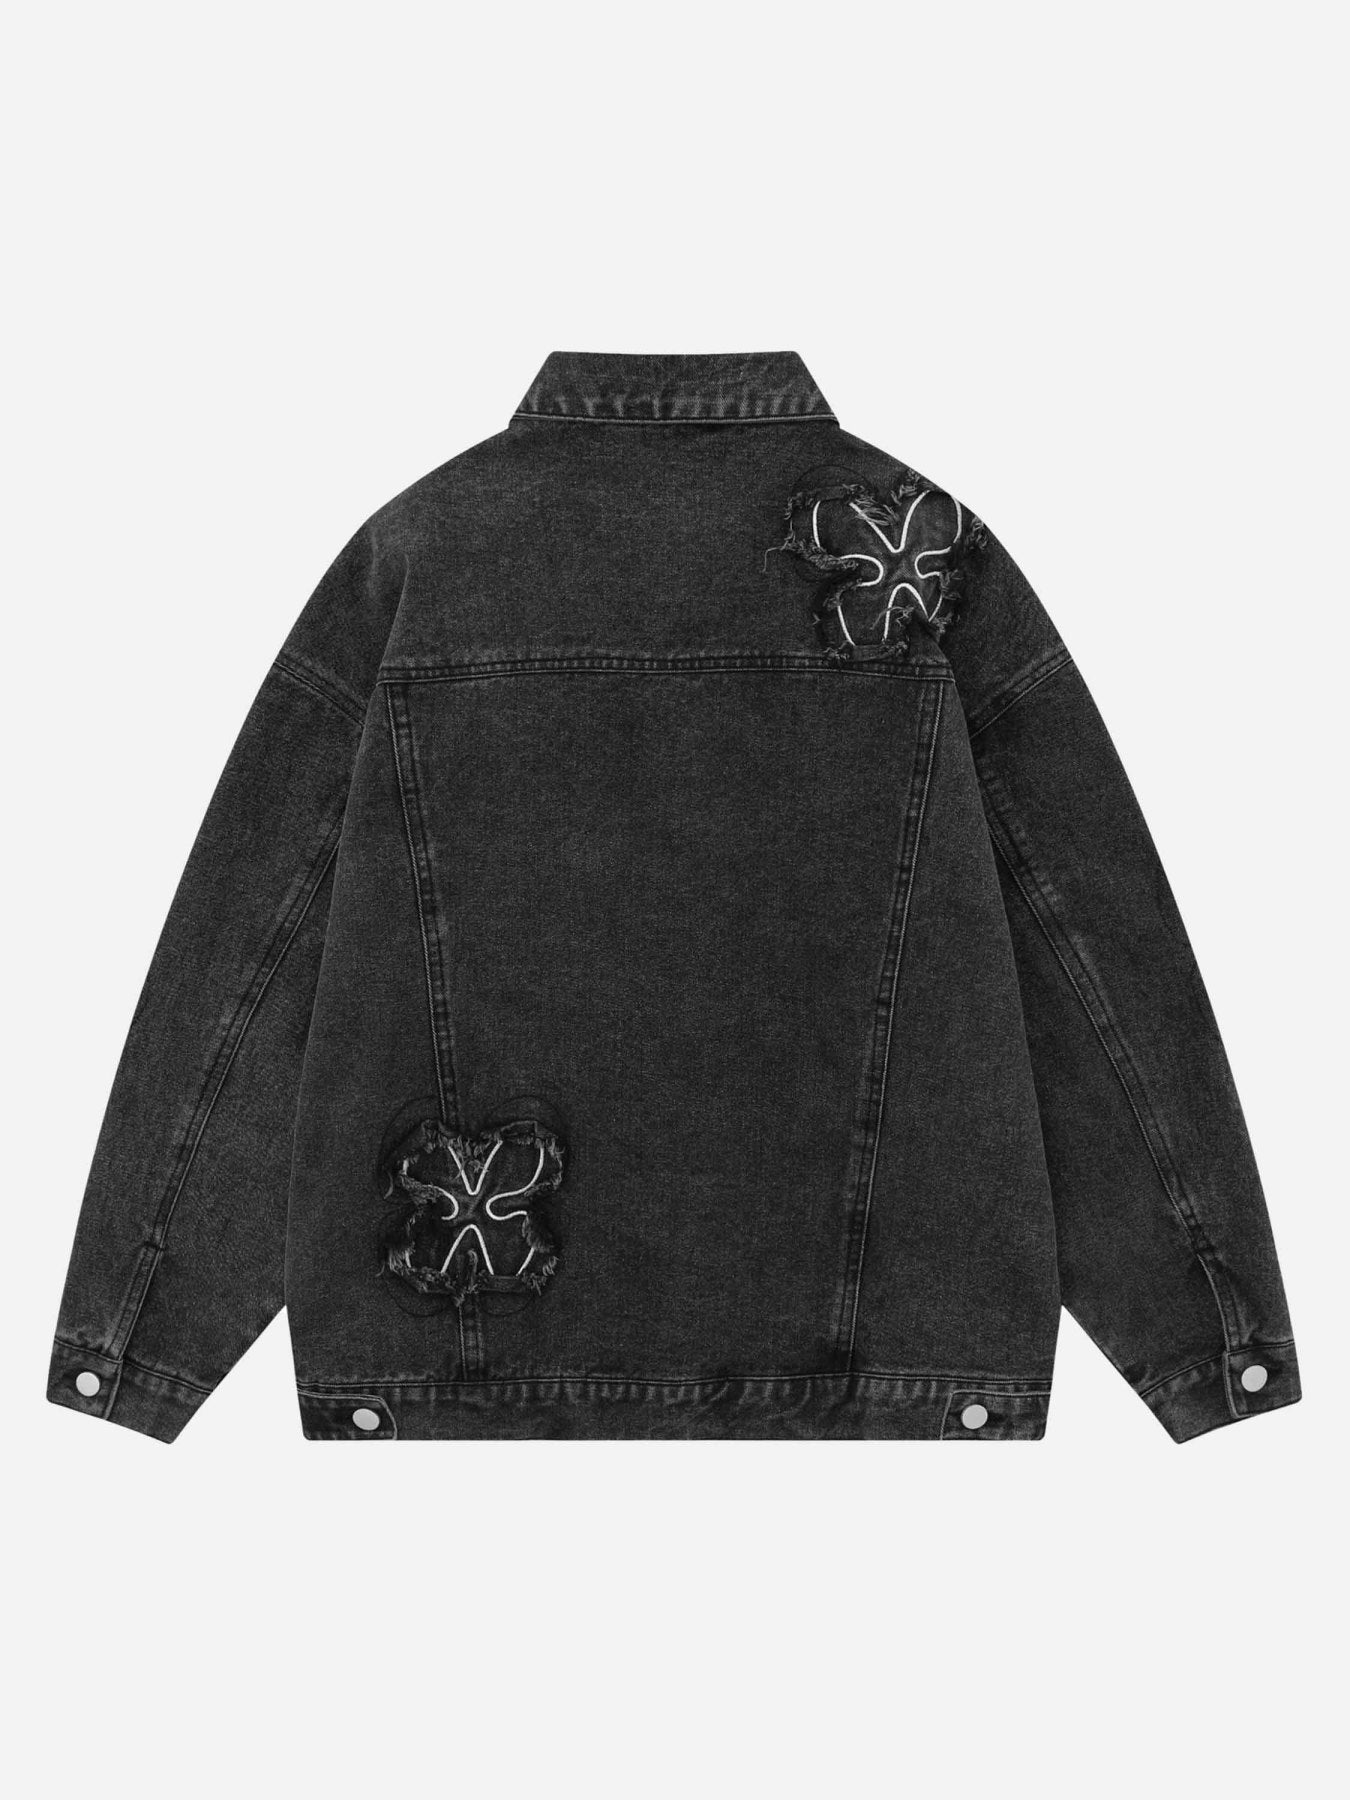 The Supermade Floral Patch Embroidered Denim Jacket